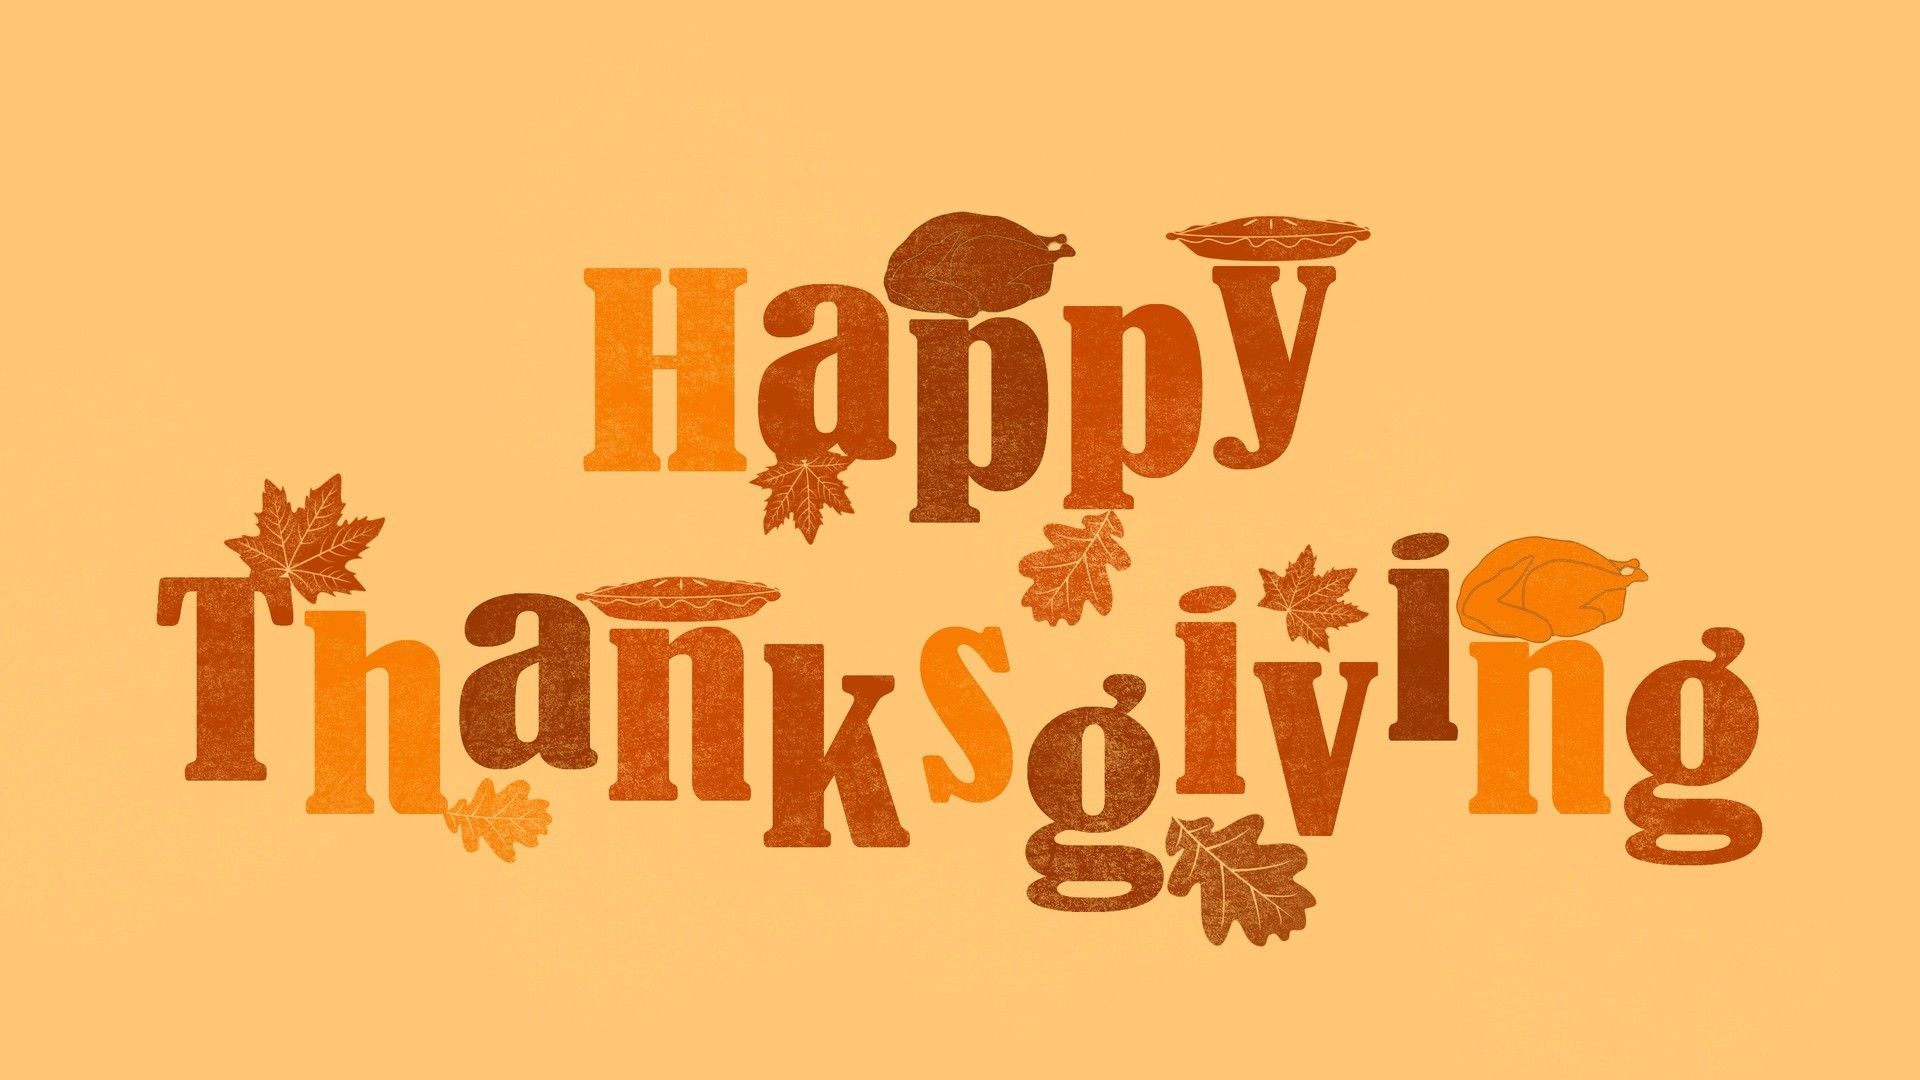 Thanksgiving wallpaper with a message - Thanksgiving